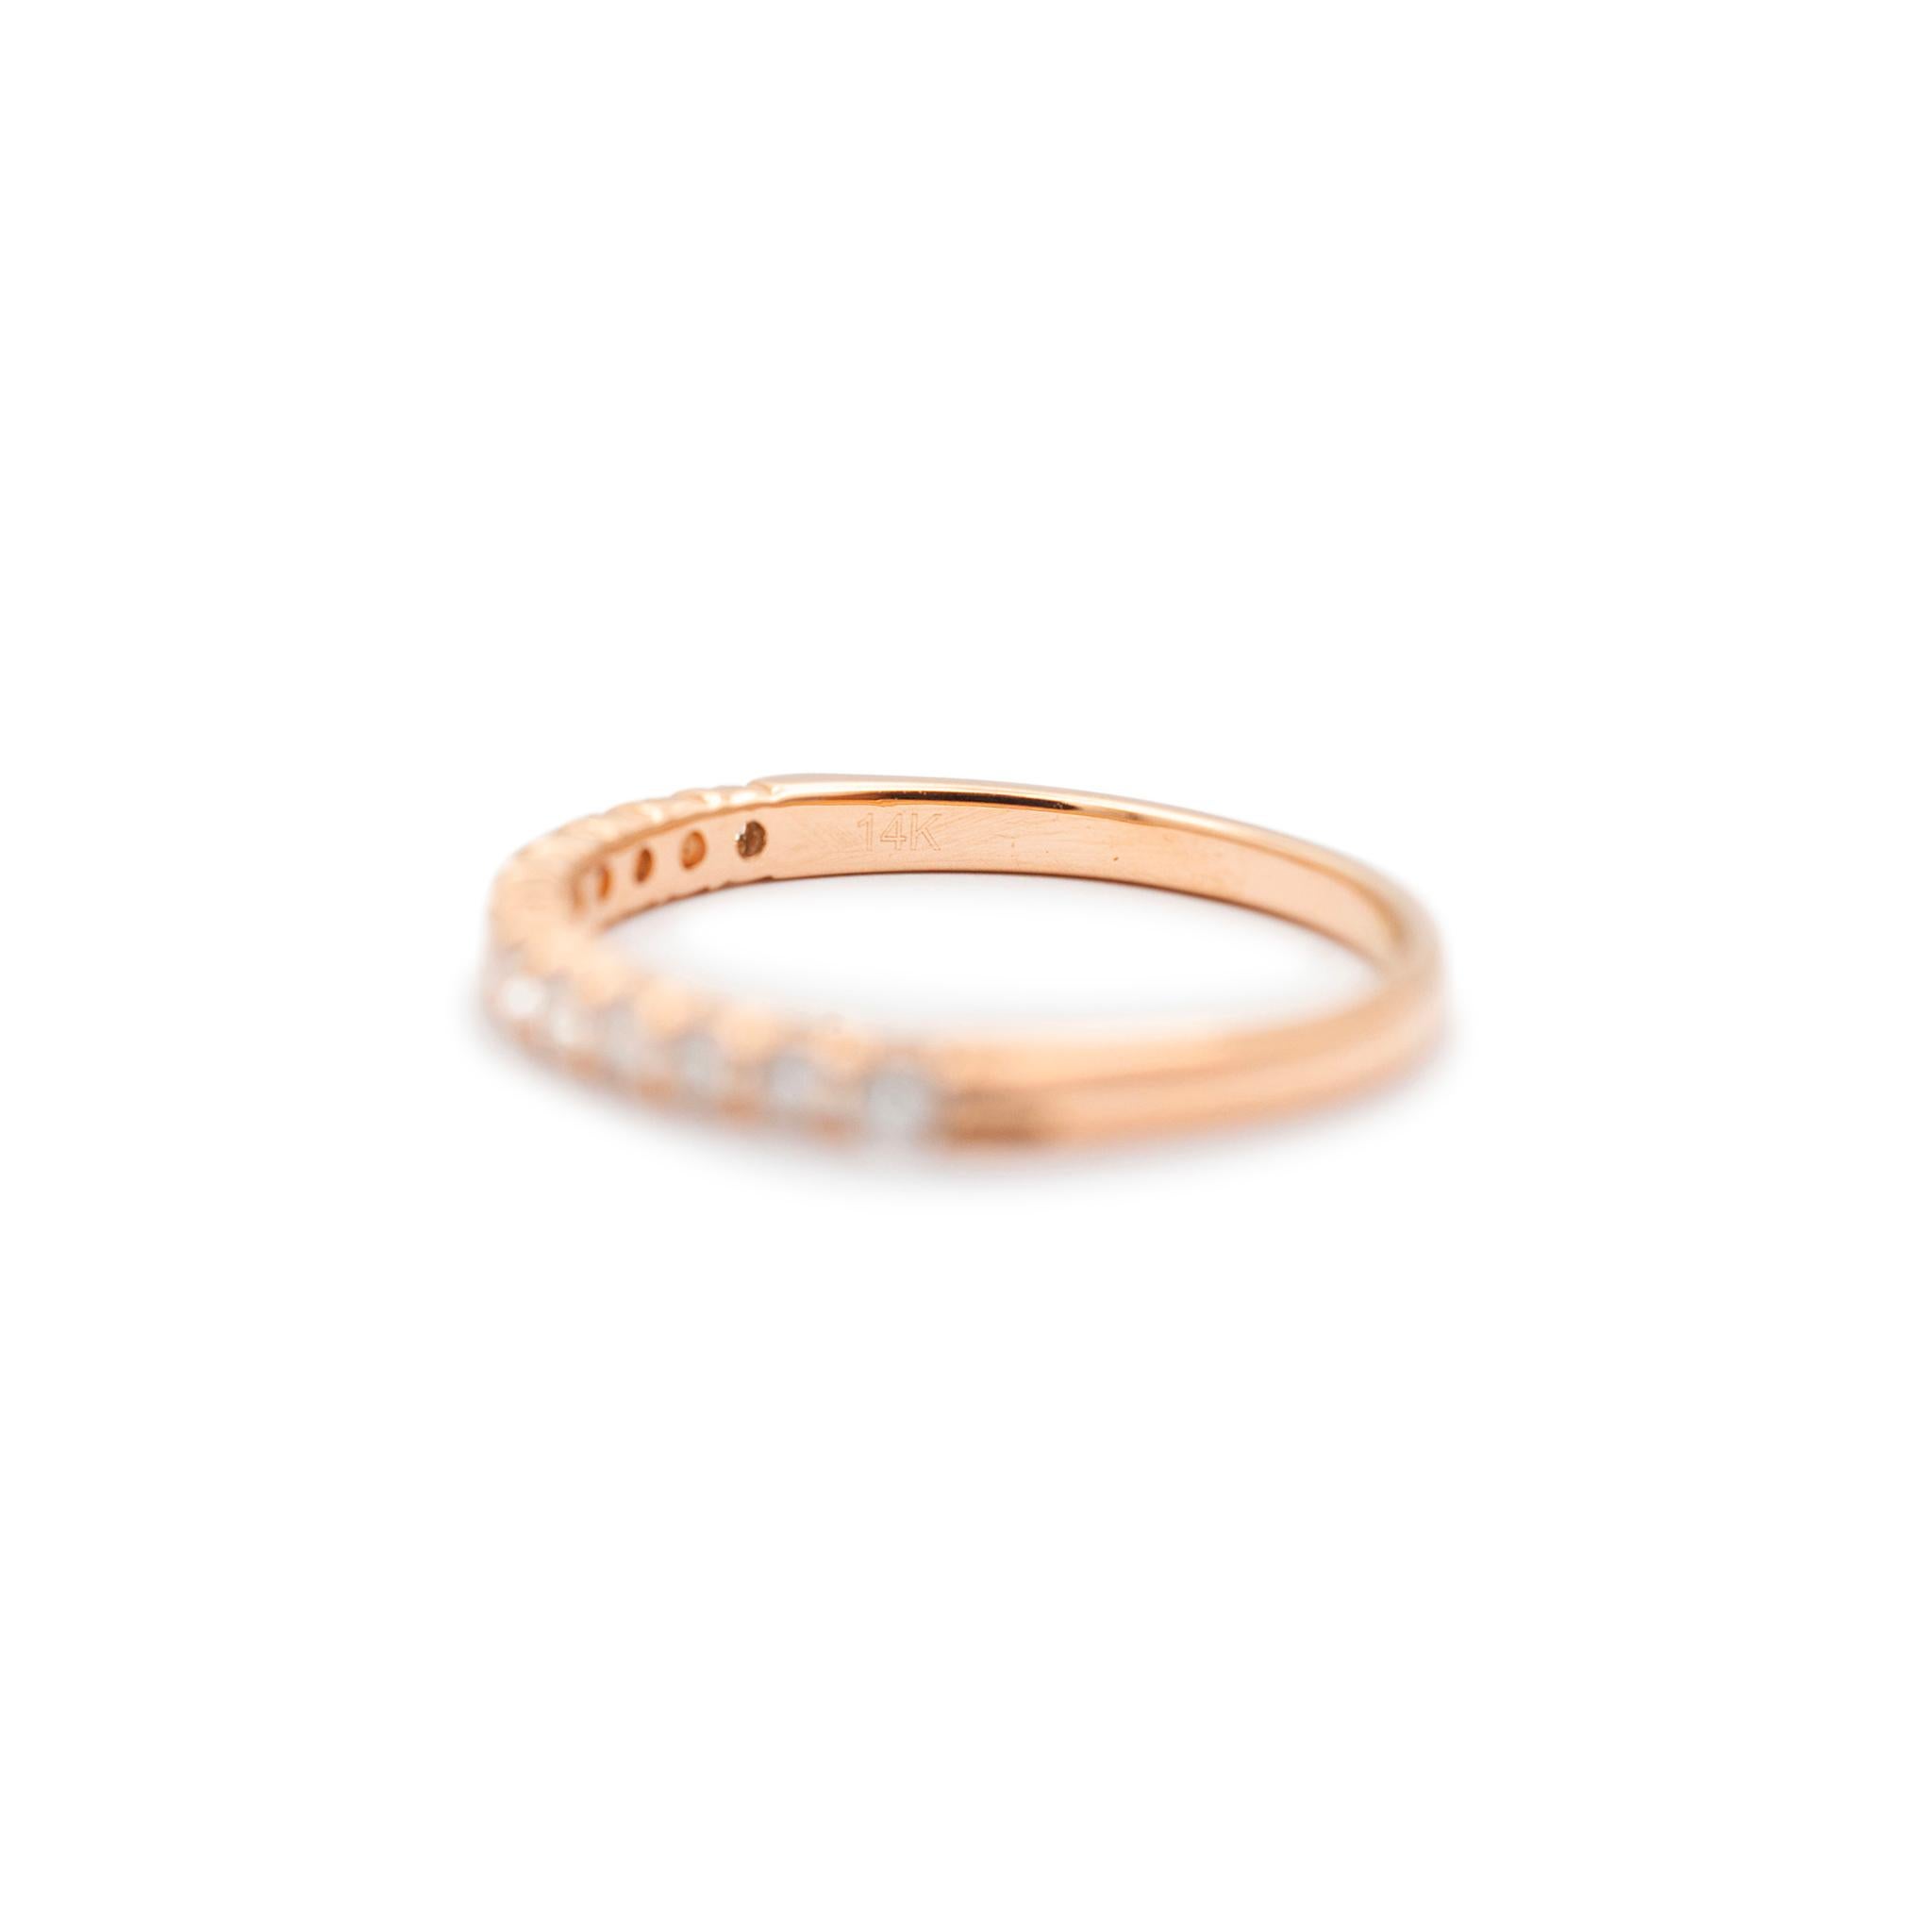 Gender: Ladies
Metal Type: 14K Rose Gold
Size: 5
Width: 2.05 mm
Weight: 1.42 grams
One lady's 14K rose gold, diamond eternity band with a half-round shank. Stamped 